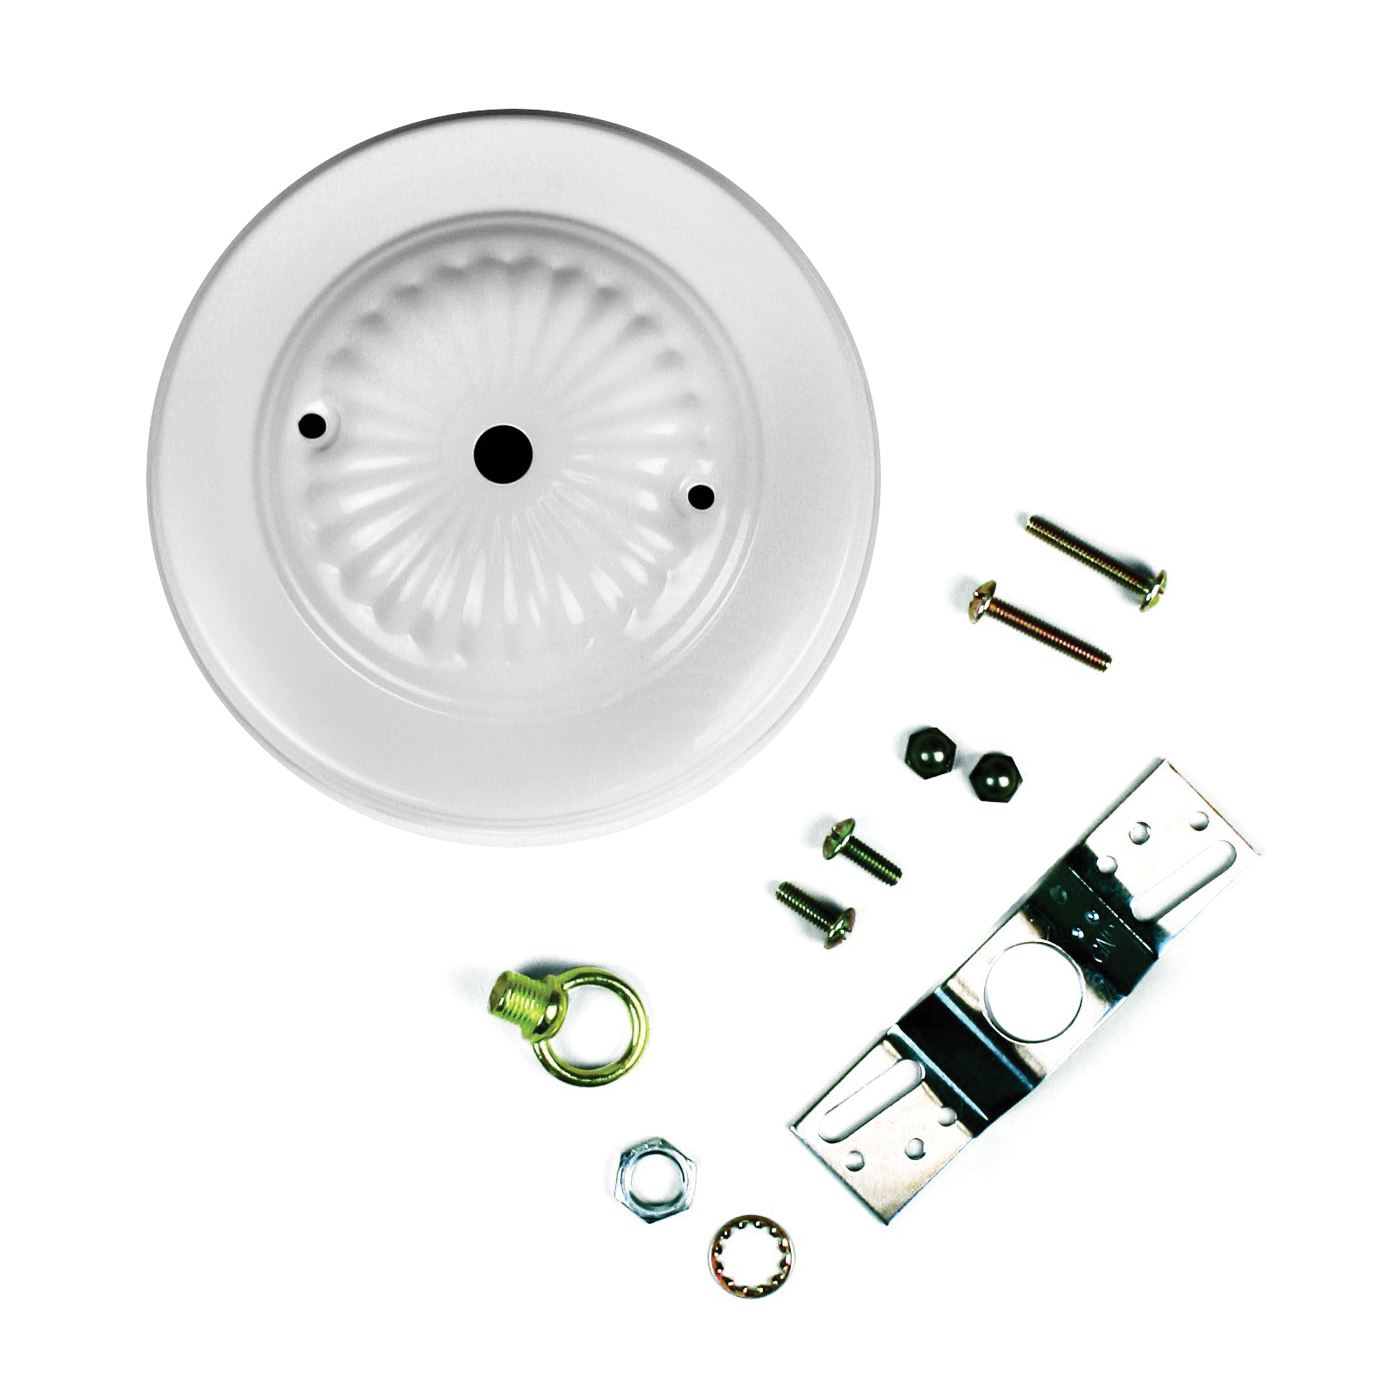 60217 Canopy Kit, Ceiling, Traditional, White, For: Outlet Box and Hang Ceiling Fixture